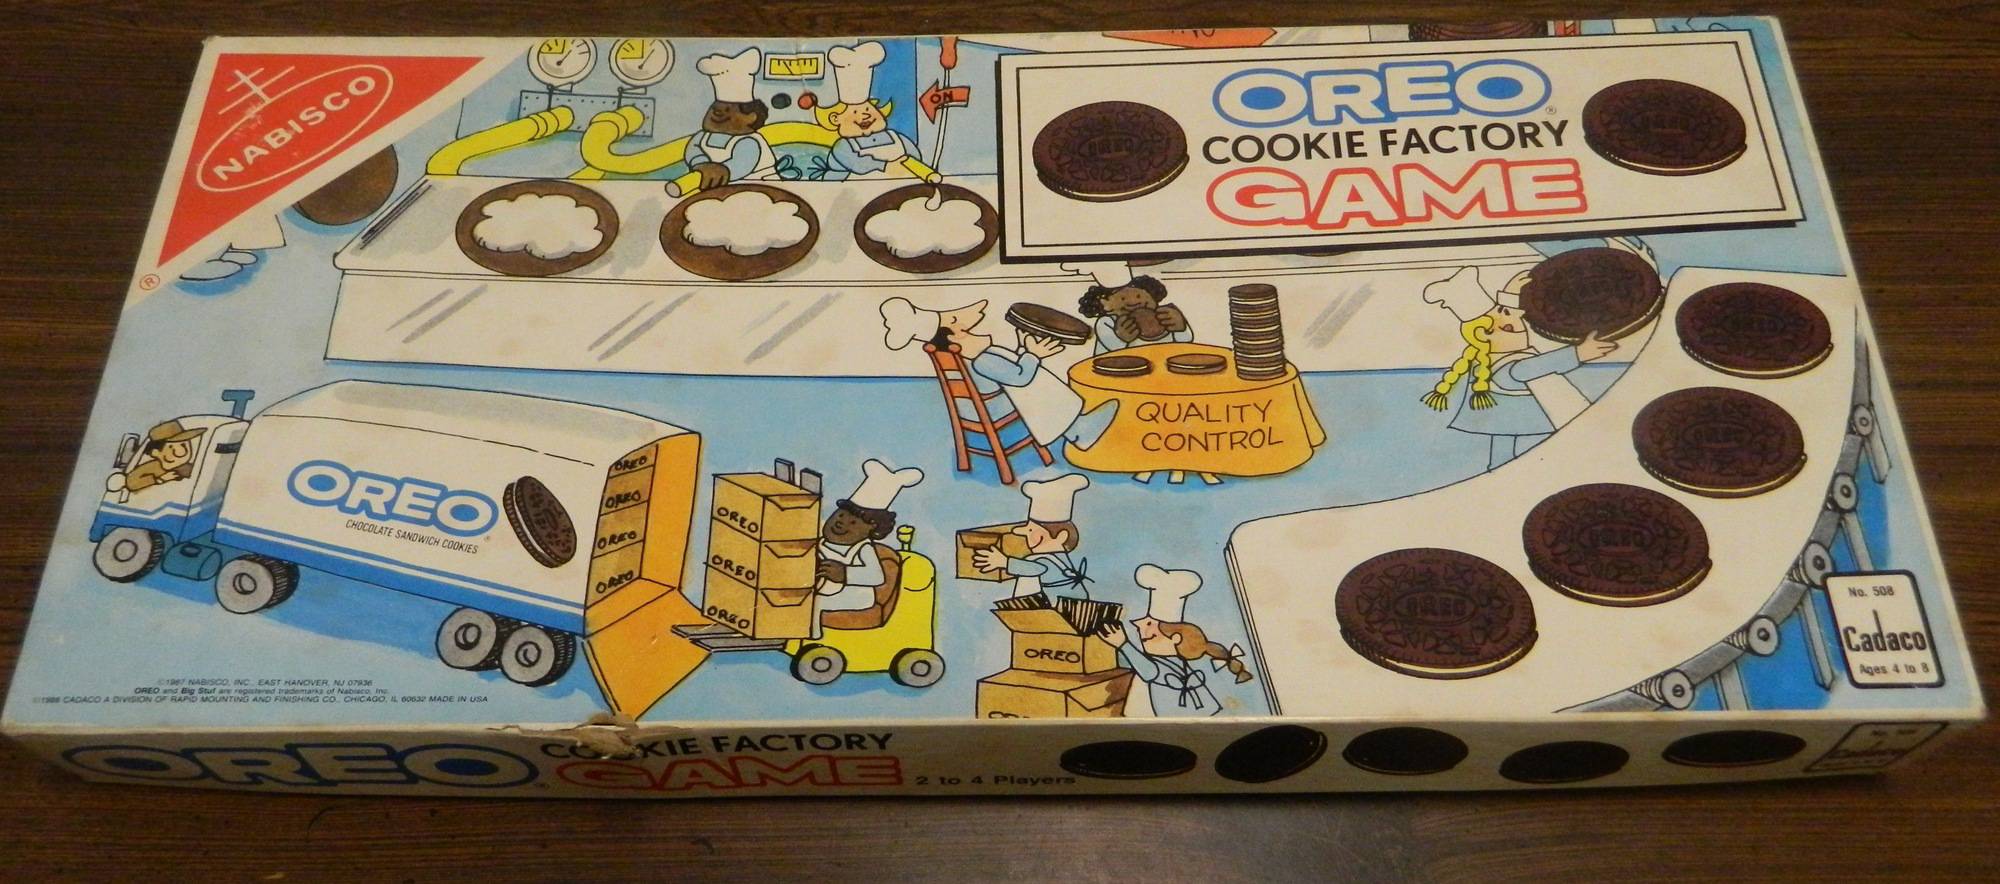 Box for Oreo Cookie Factory Game